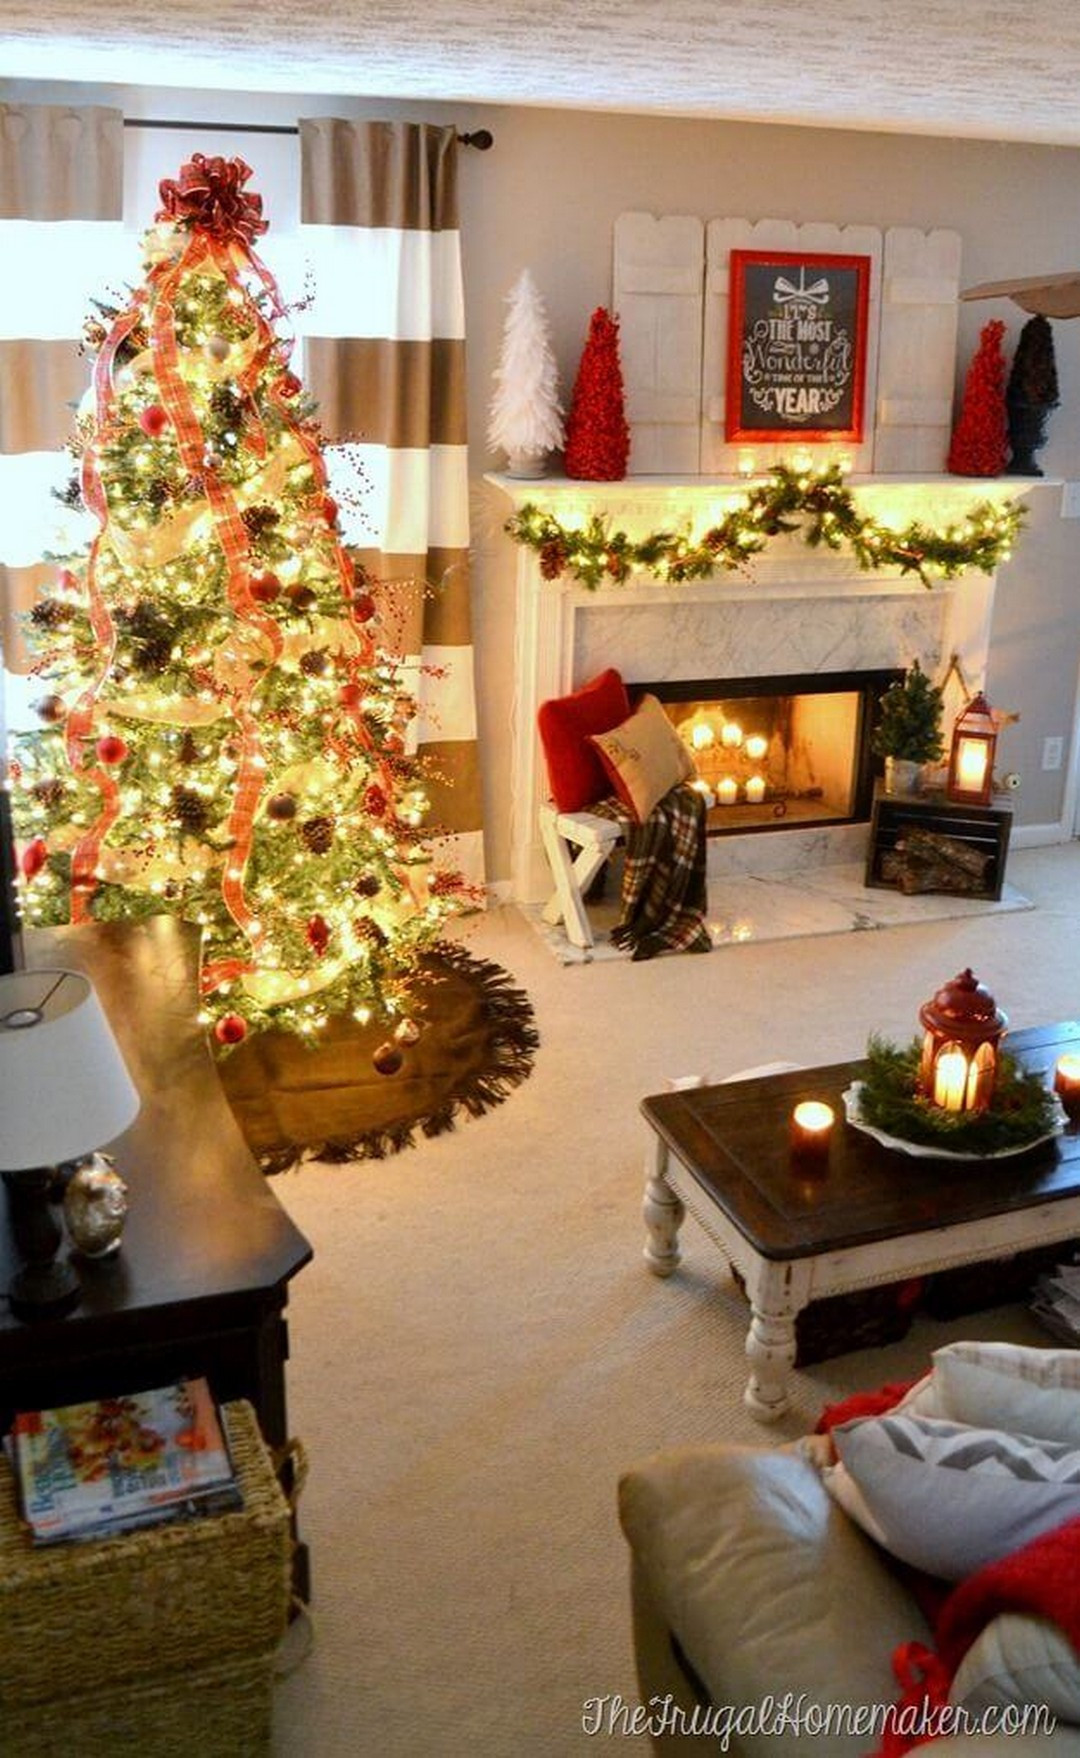 Christmas Lights In Living Room
 32 Wonderful and Beautiful Christmas Living Room Decor Ideas